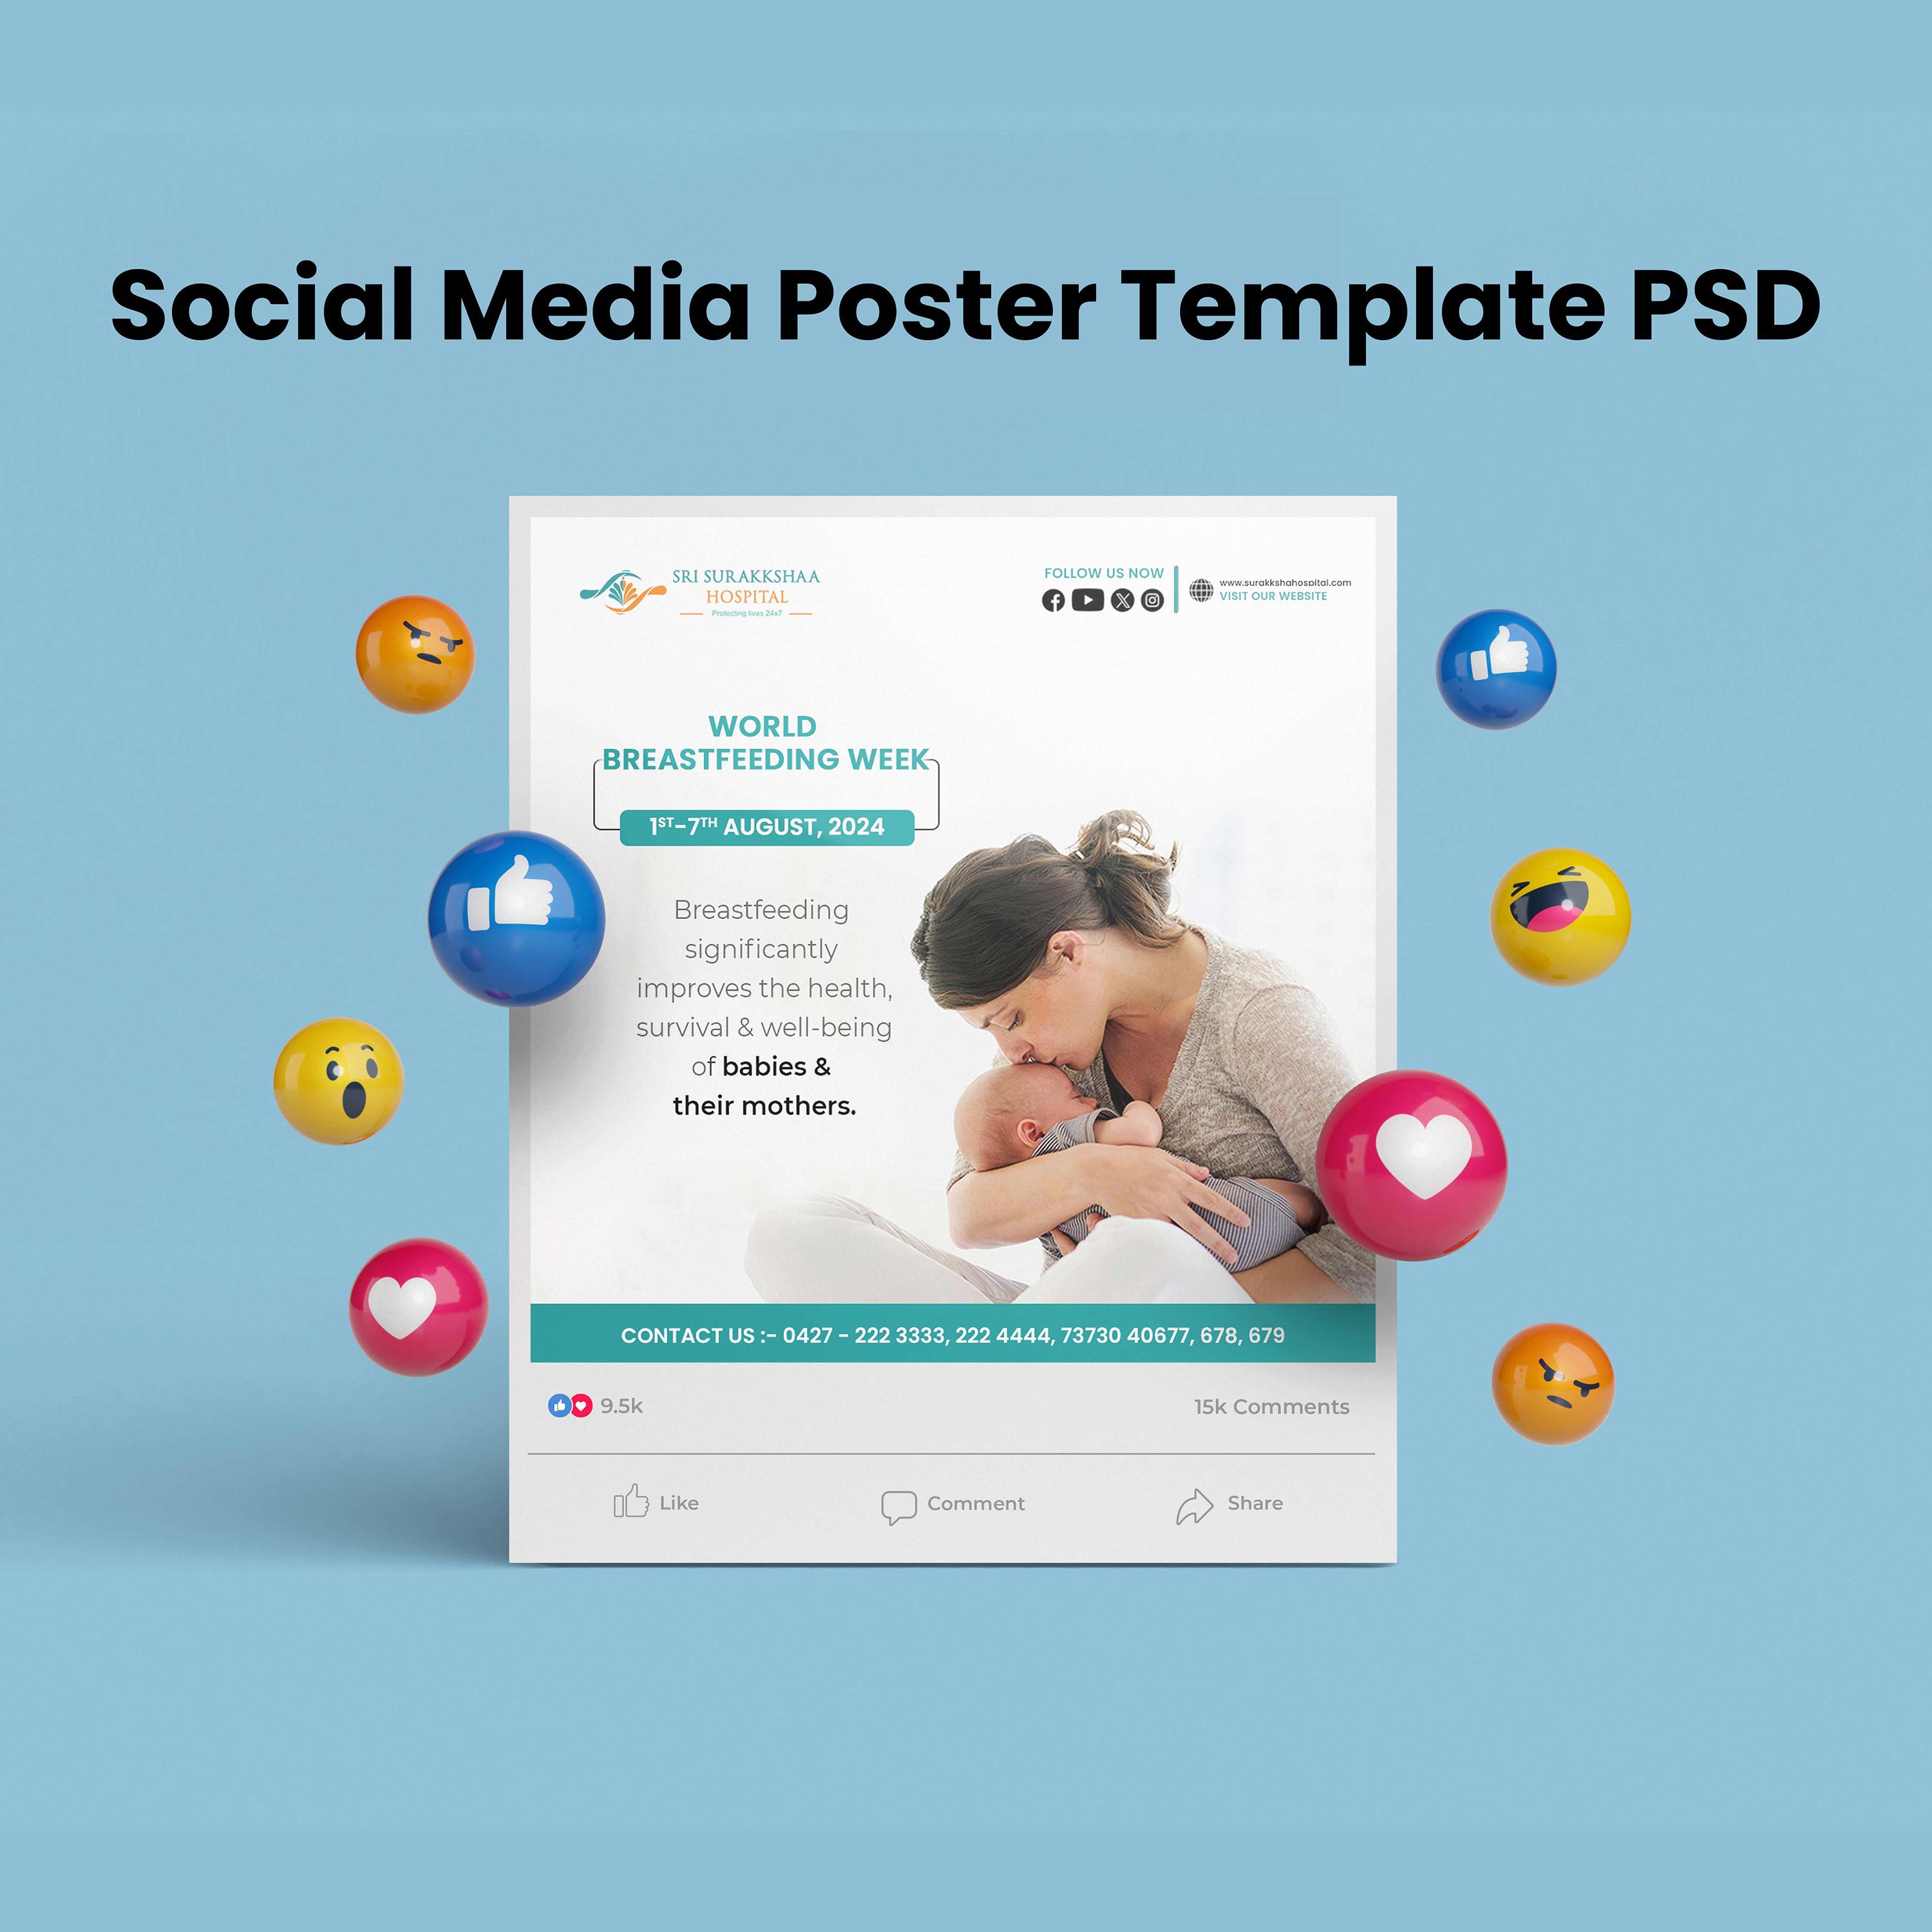 Social Media Post Template cover image.